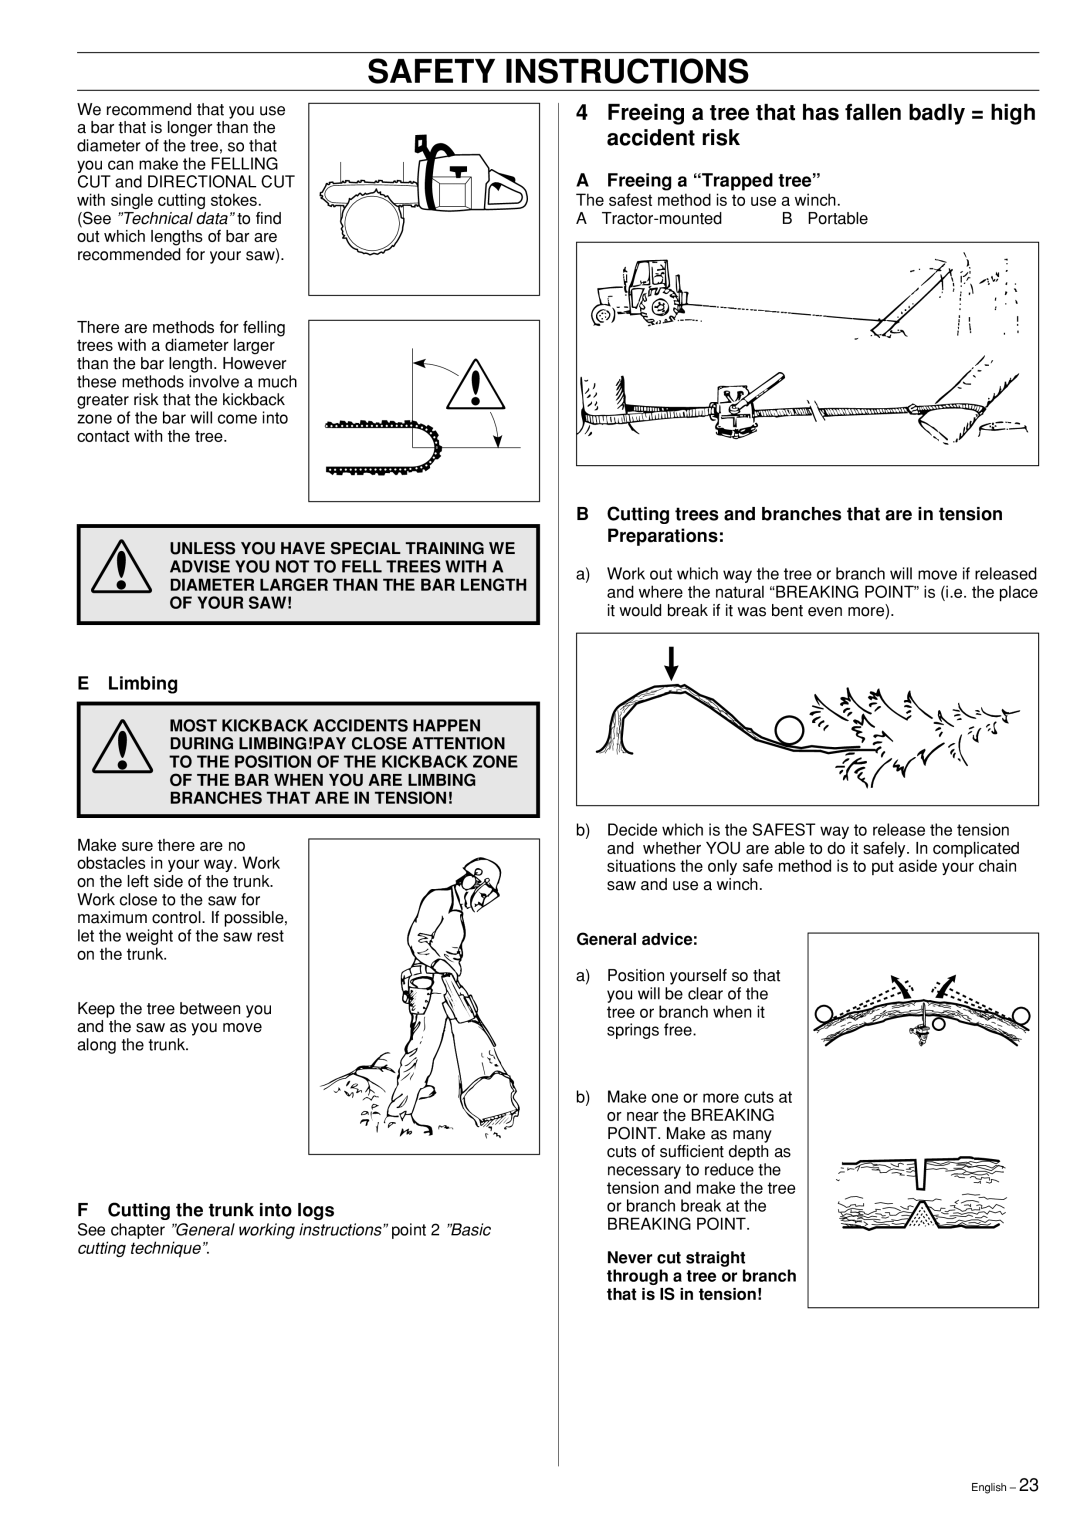 Husqvarna 55 Rancher manual Safety Instructions, Freeing a tree that has fallen badly = high accident risk, E Limbing 